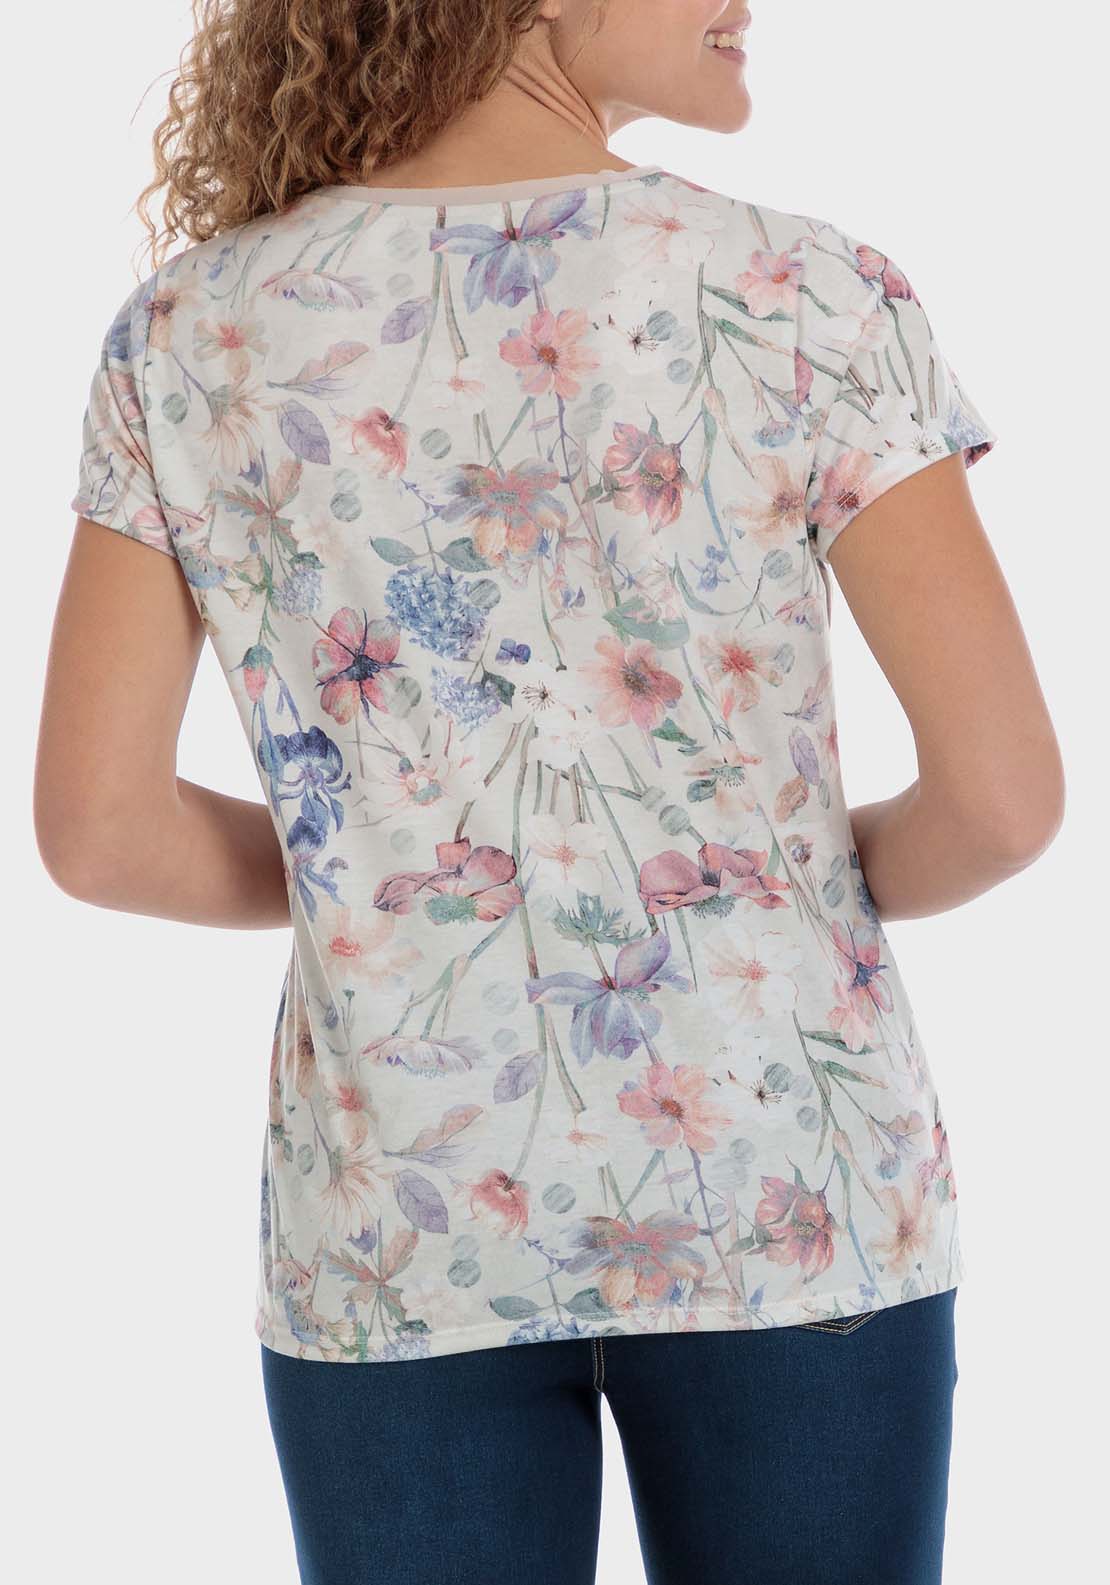 Punt Roma Floral Print T-Shirt 2 Shaws Department Stores